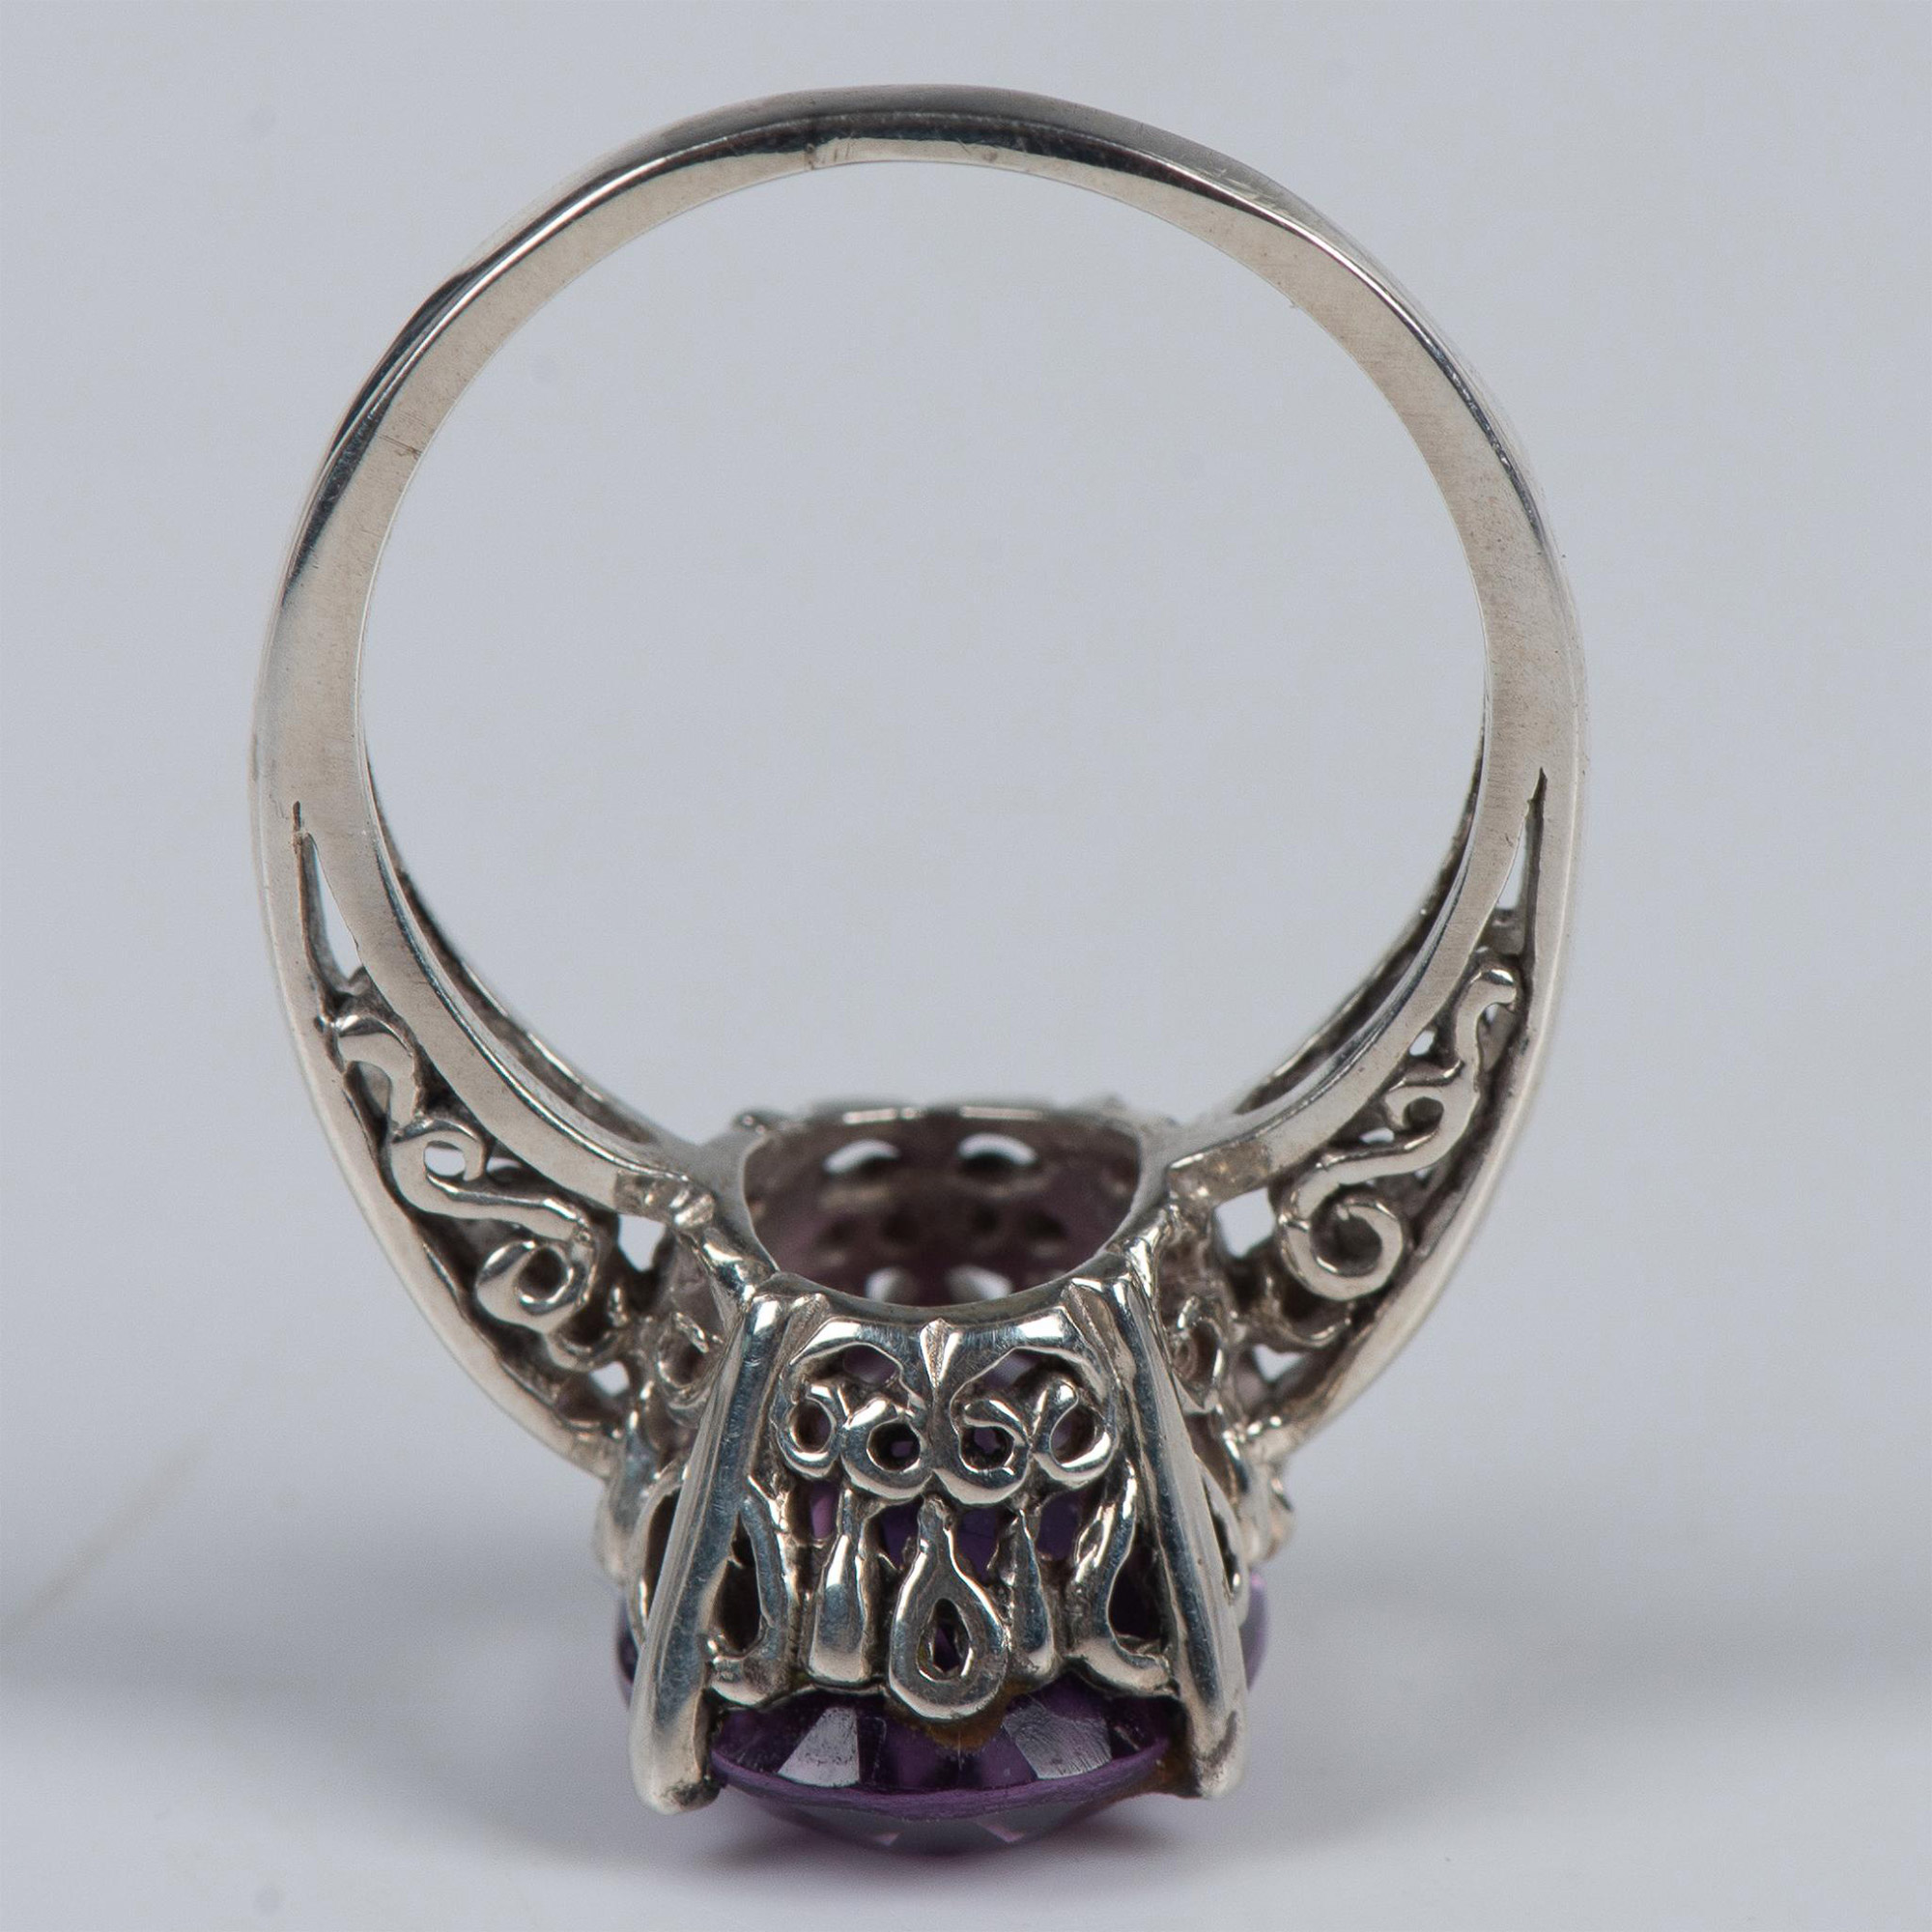 Fabulous Hand Crafted Kabana Sterling Silver & Amethyst Ring - Image 4 of 7